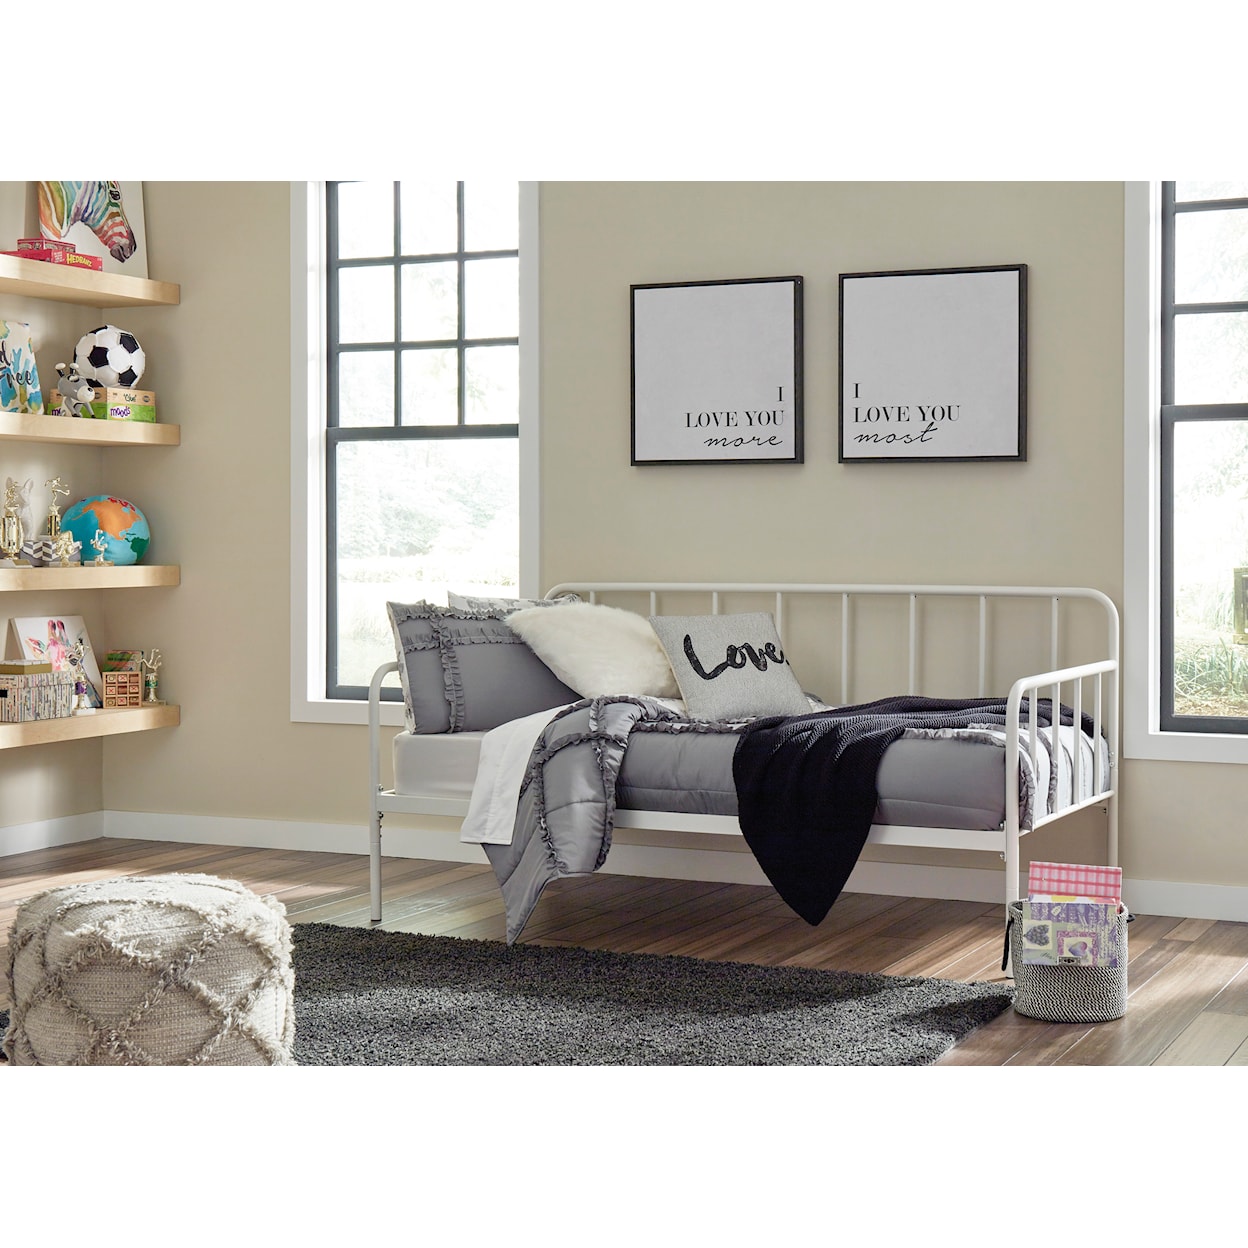 Ashley Signature Design Trentlore Twin Metal Day Bed with Platform